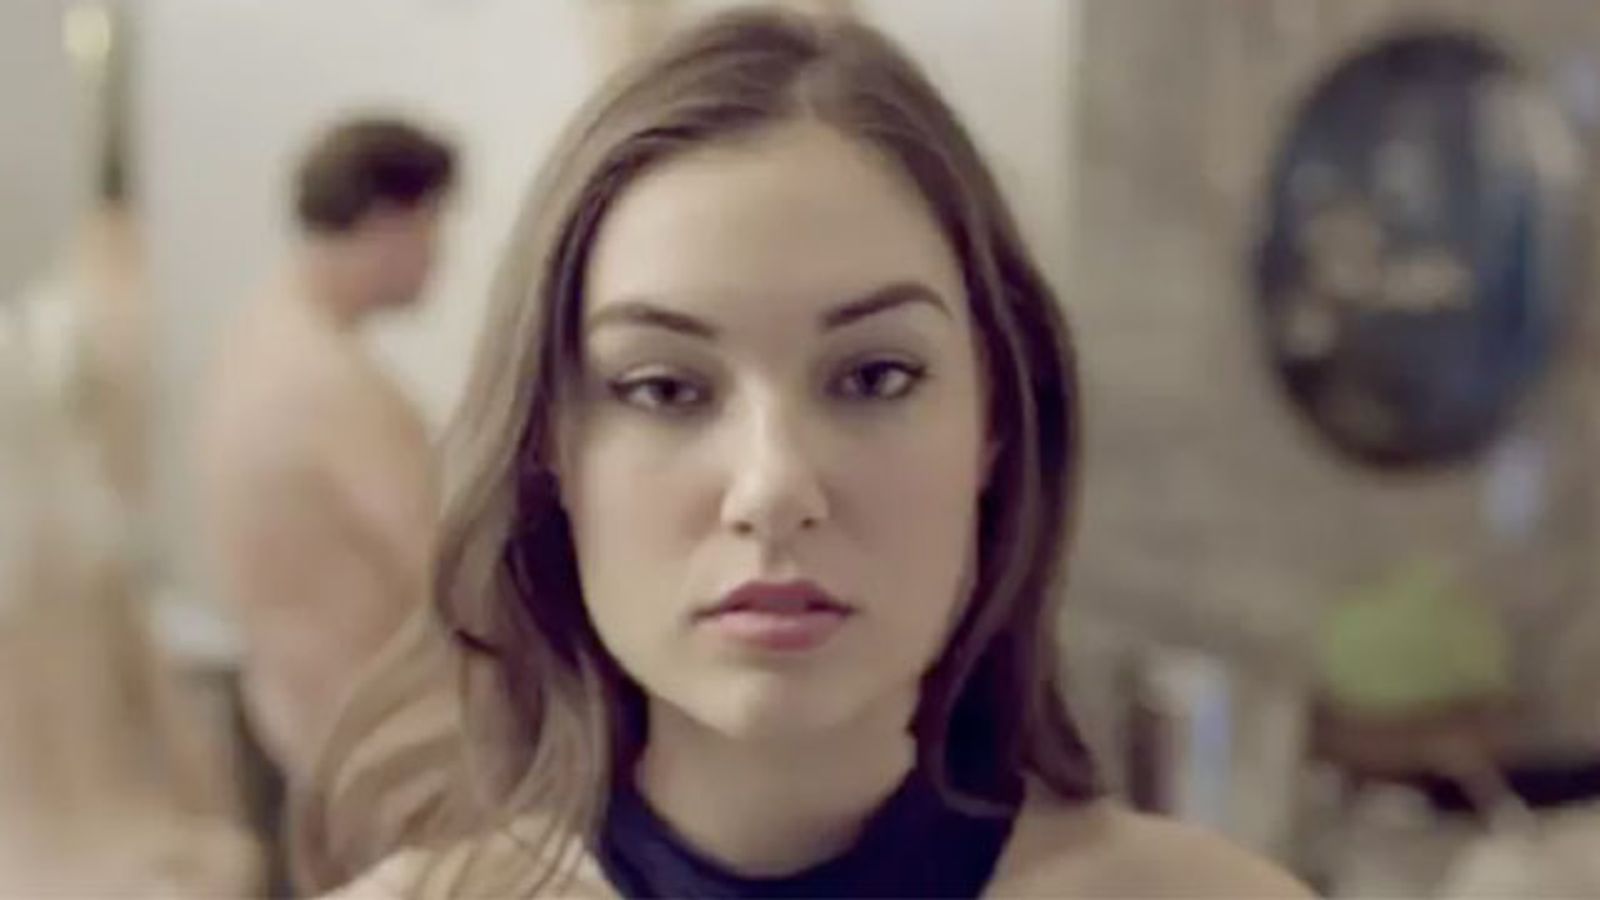 Sasha Grey Abducted by Aliens, Forced to Make Inchoate PSA